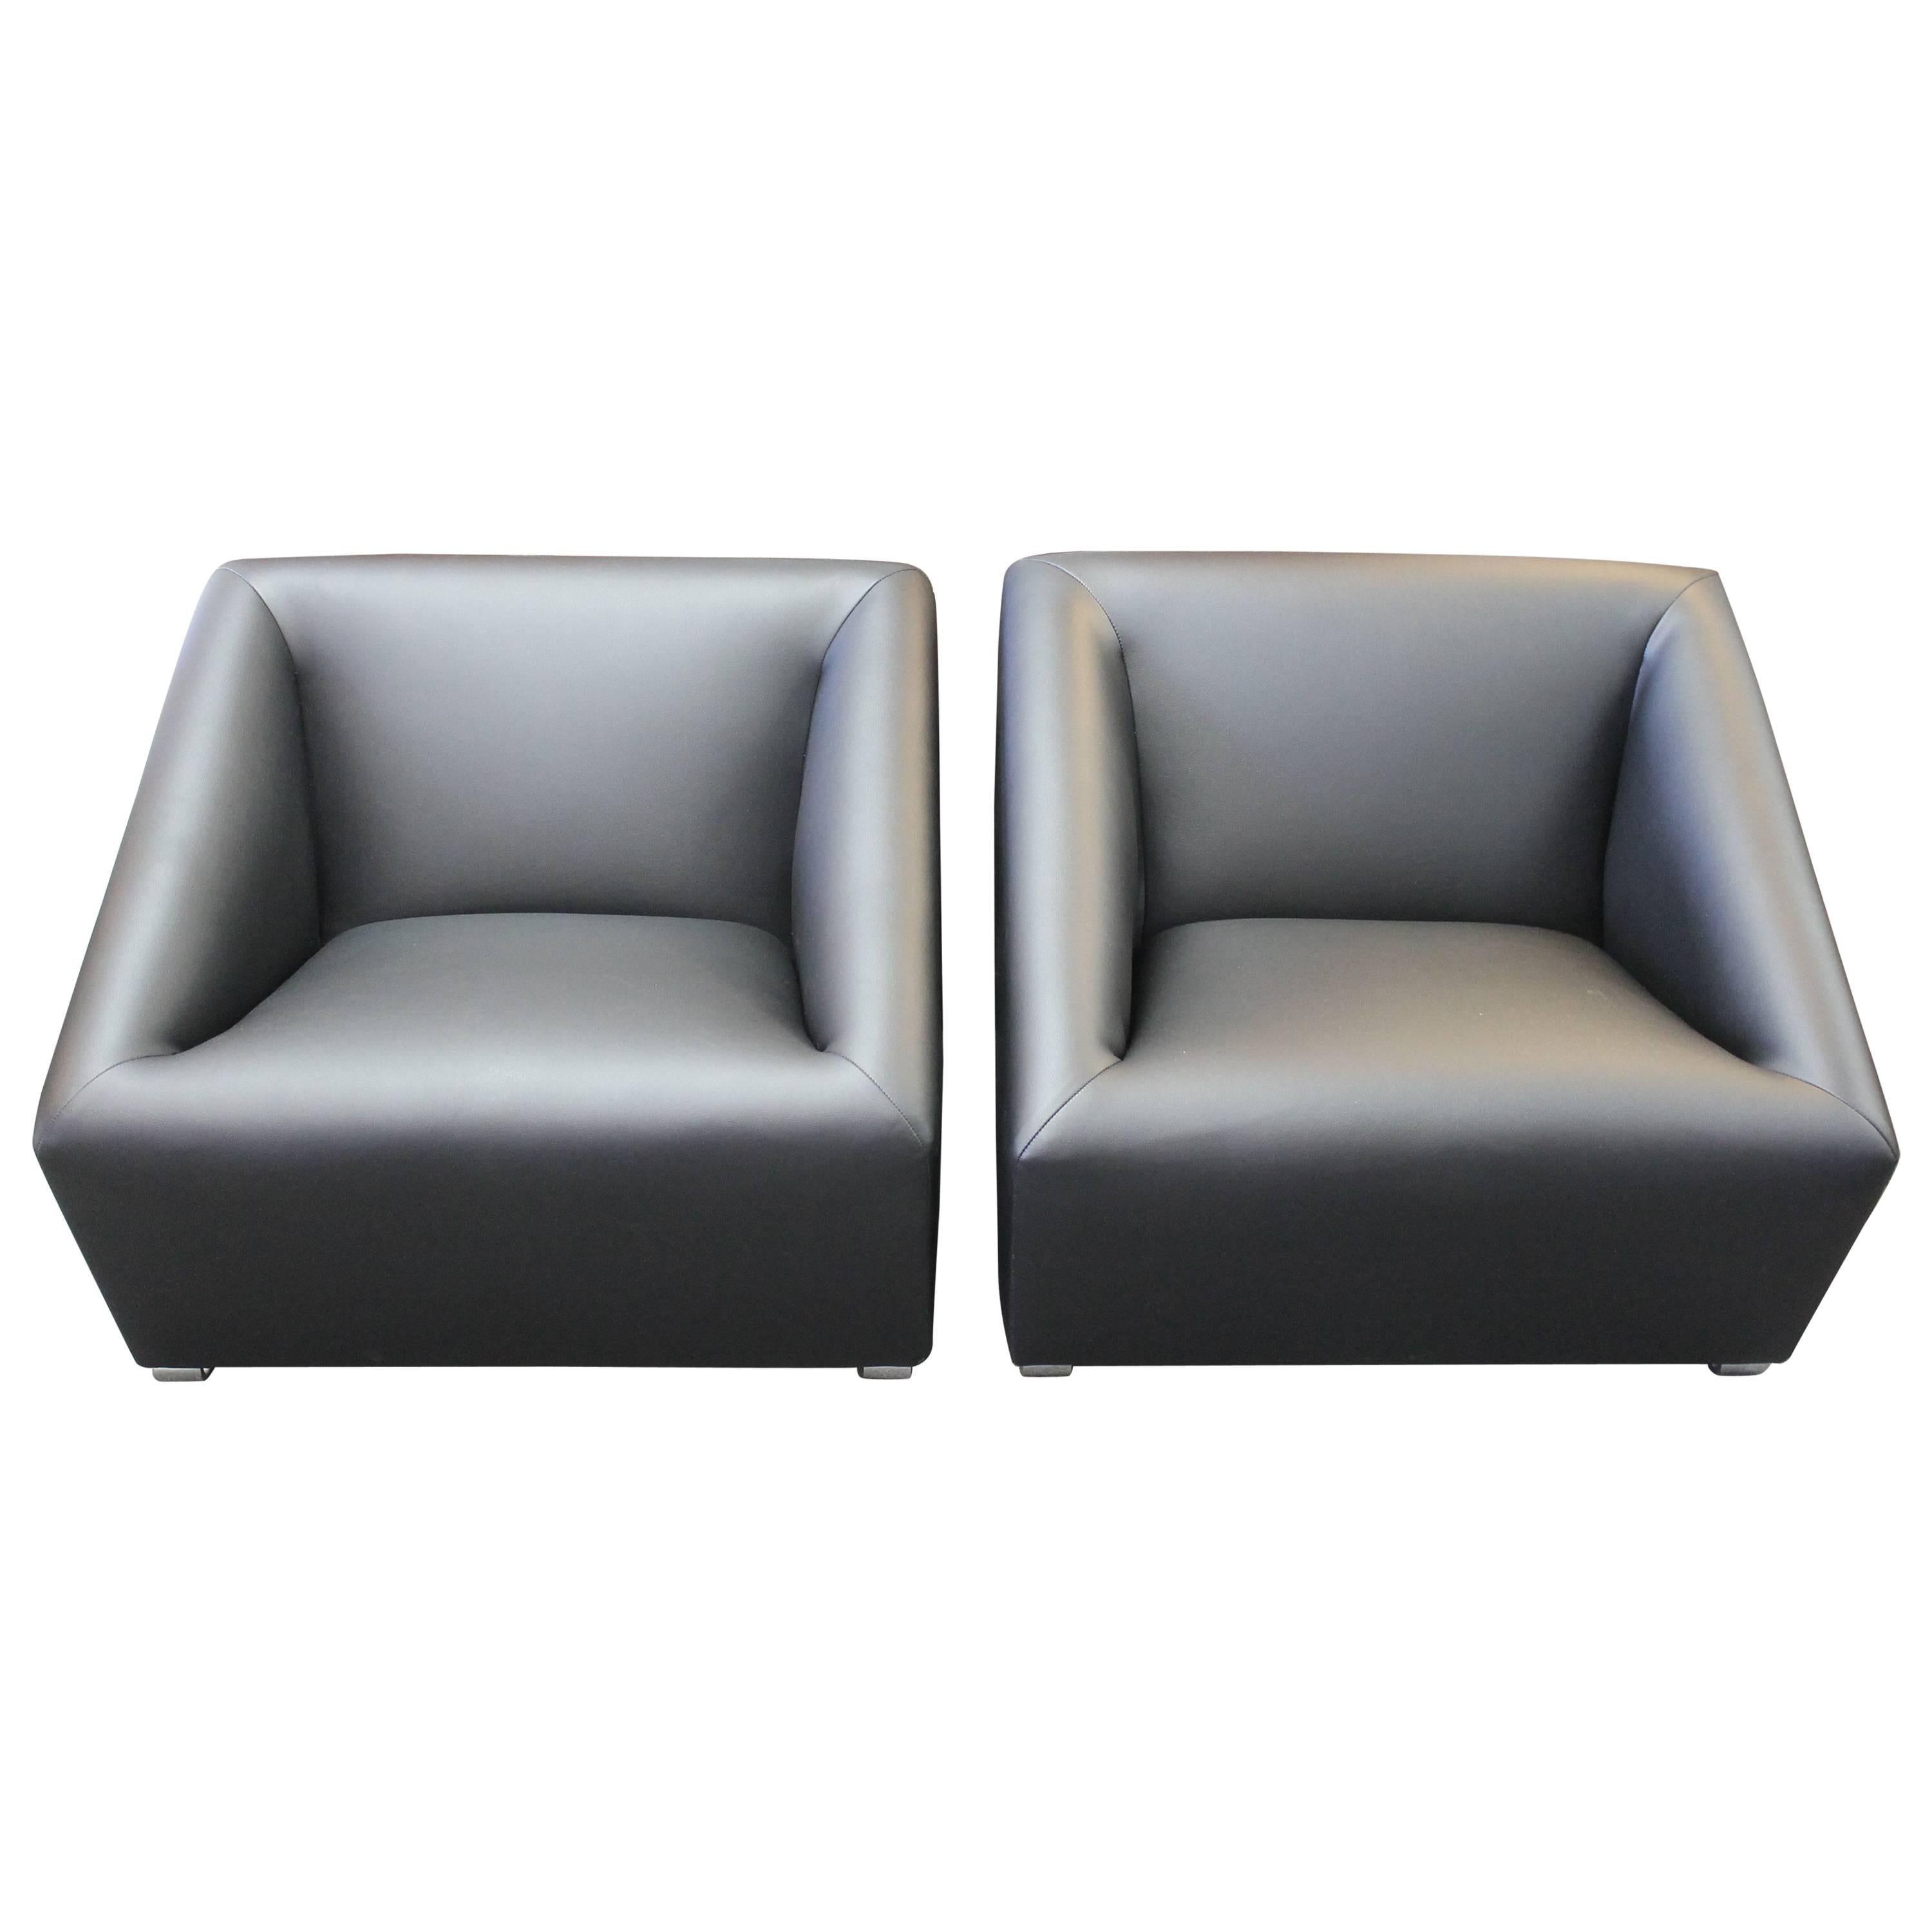 Pair of Lounge Chairs by Bellini